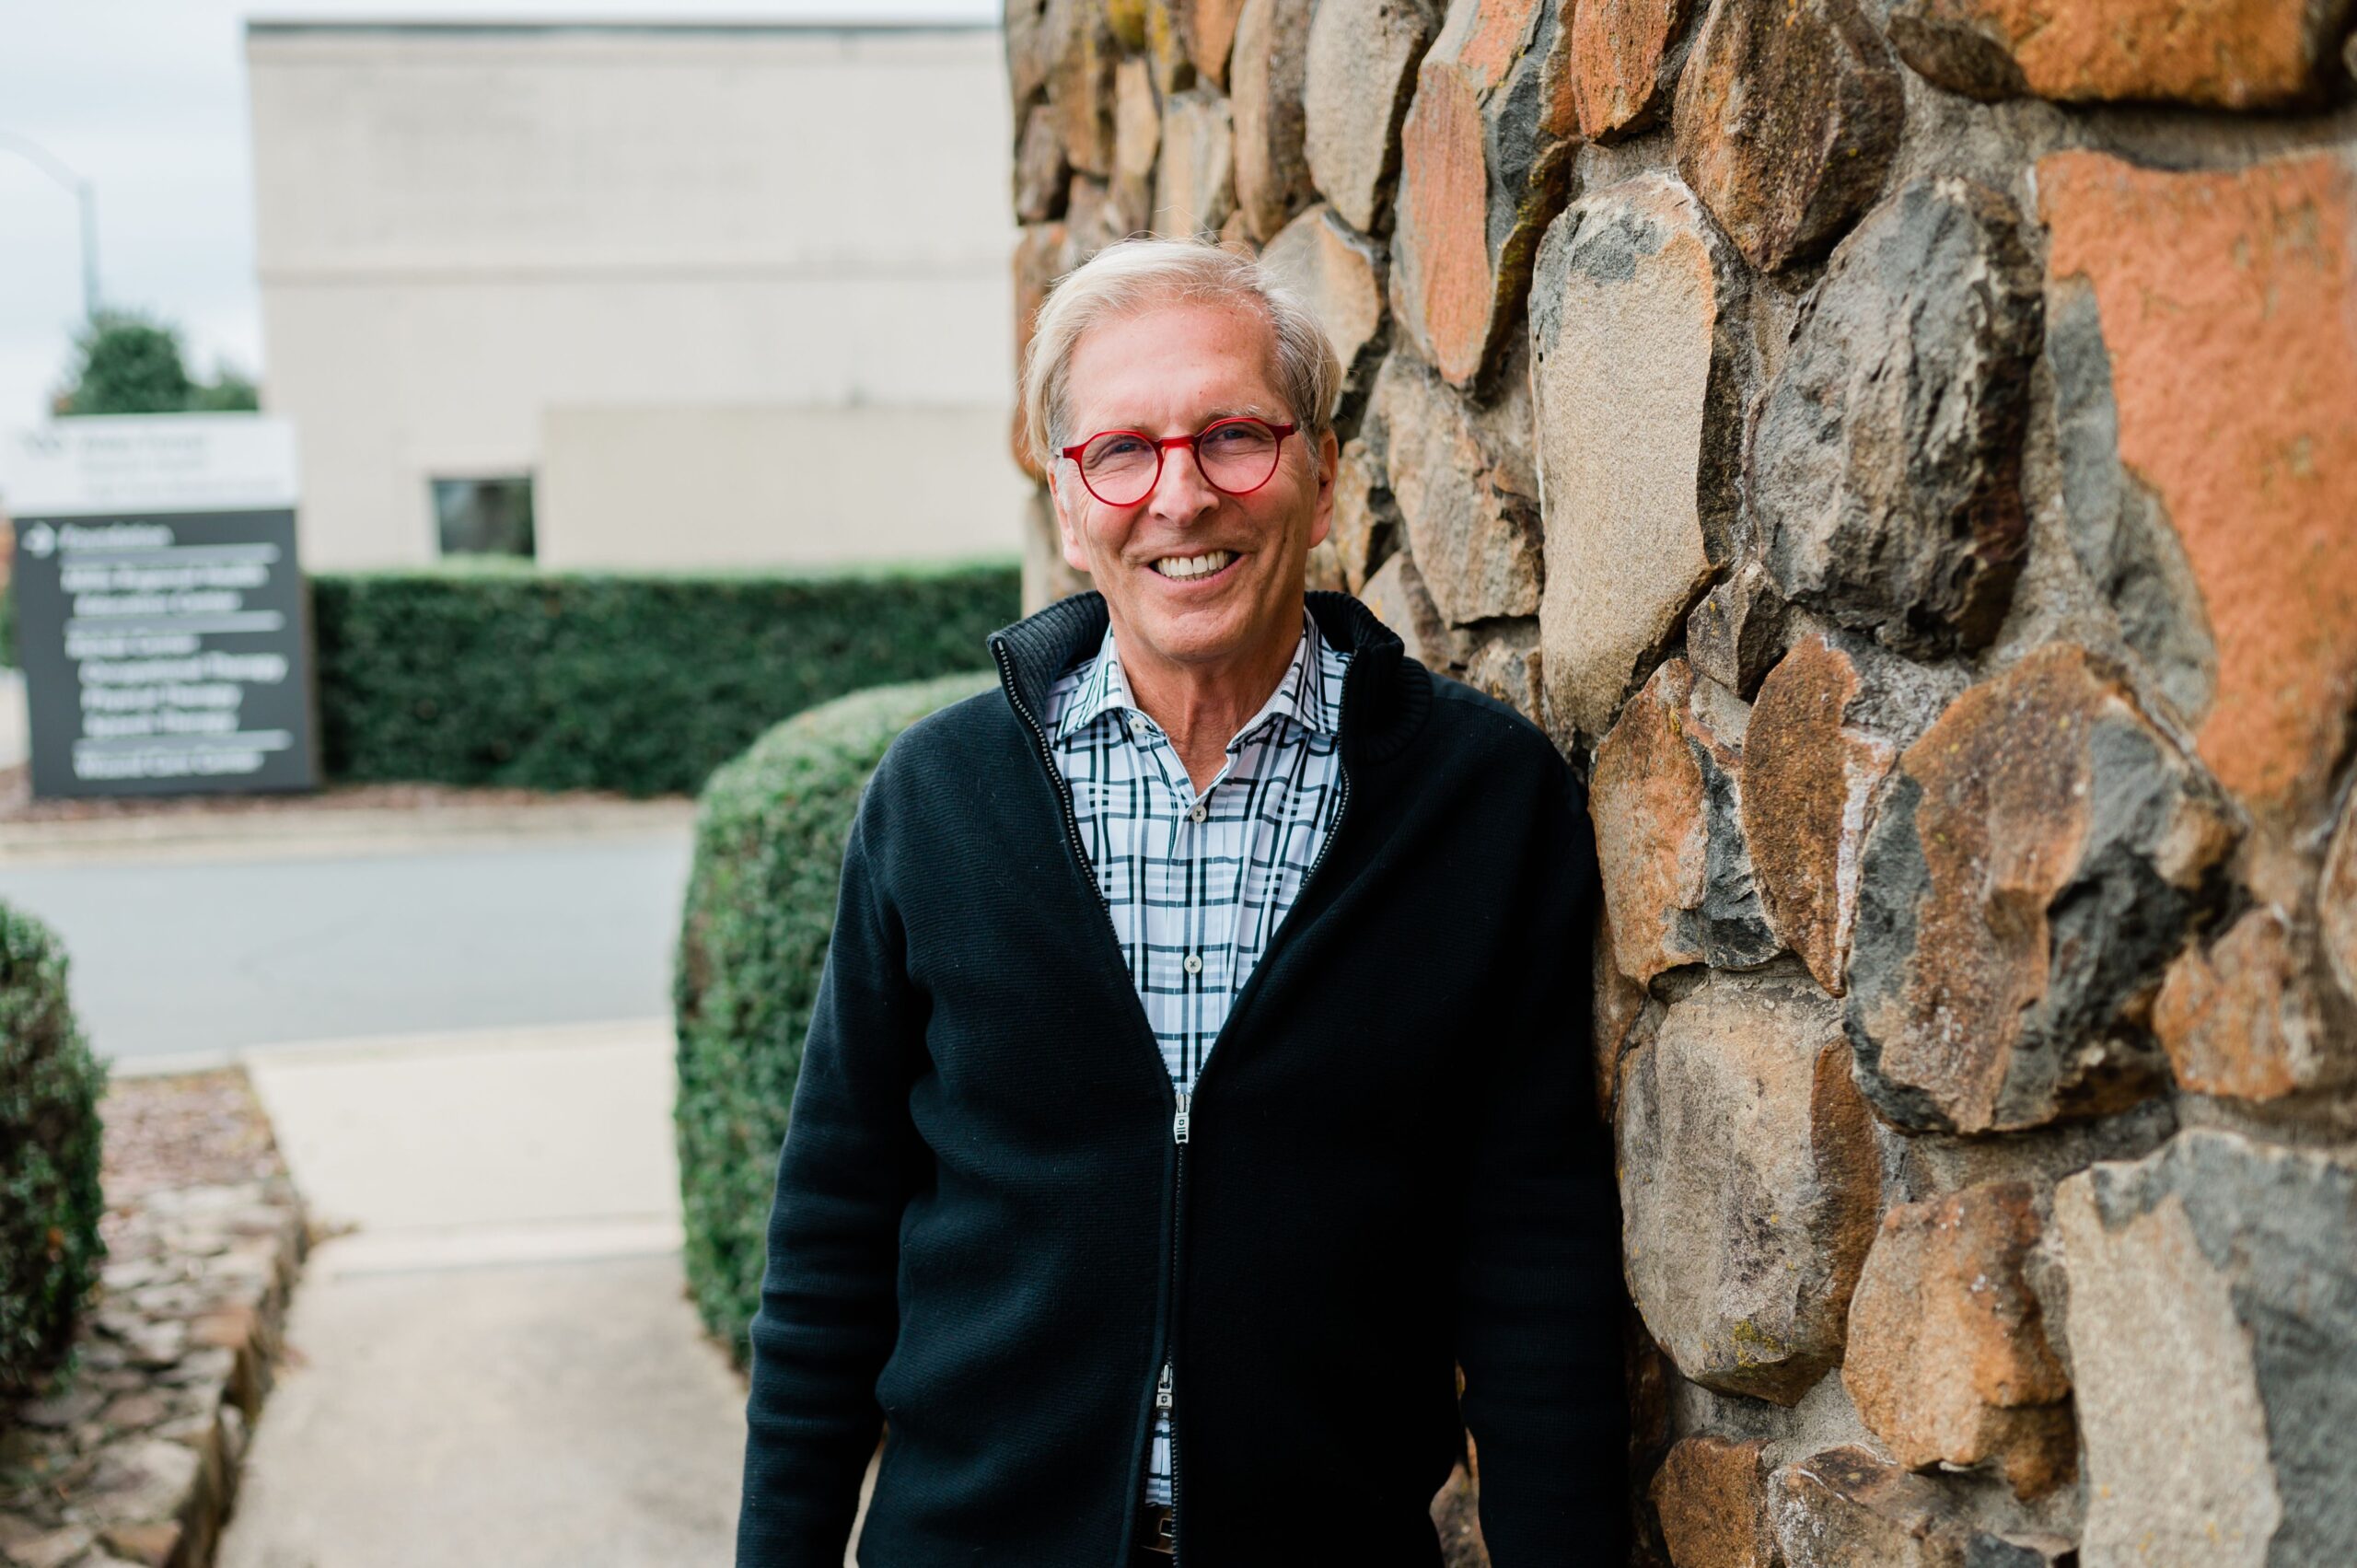 Dr. Frosty Culp, retired dentist from High Point, NC smiles at the camera while leaning on a wall at the Community Clinic of High Point.